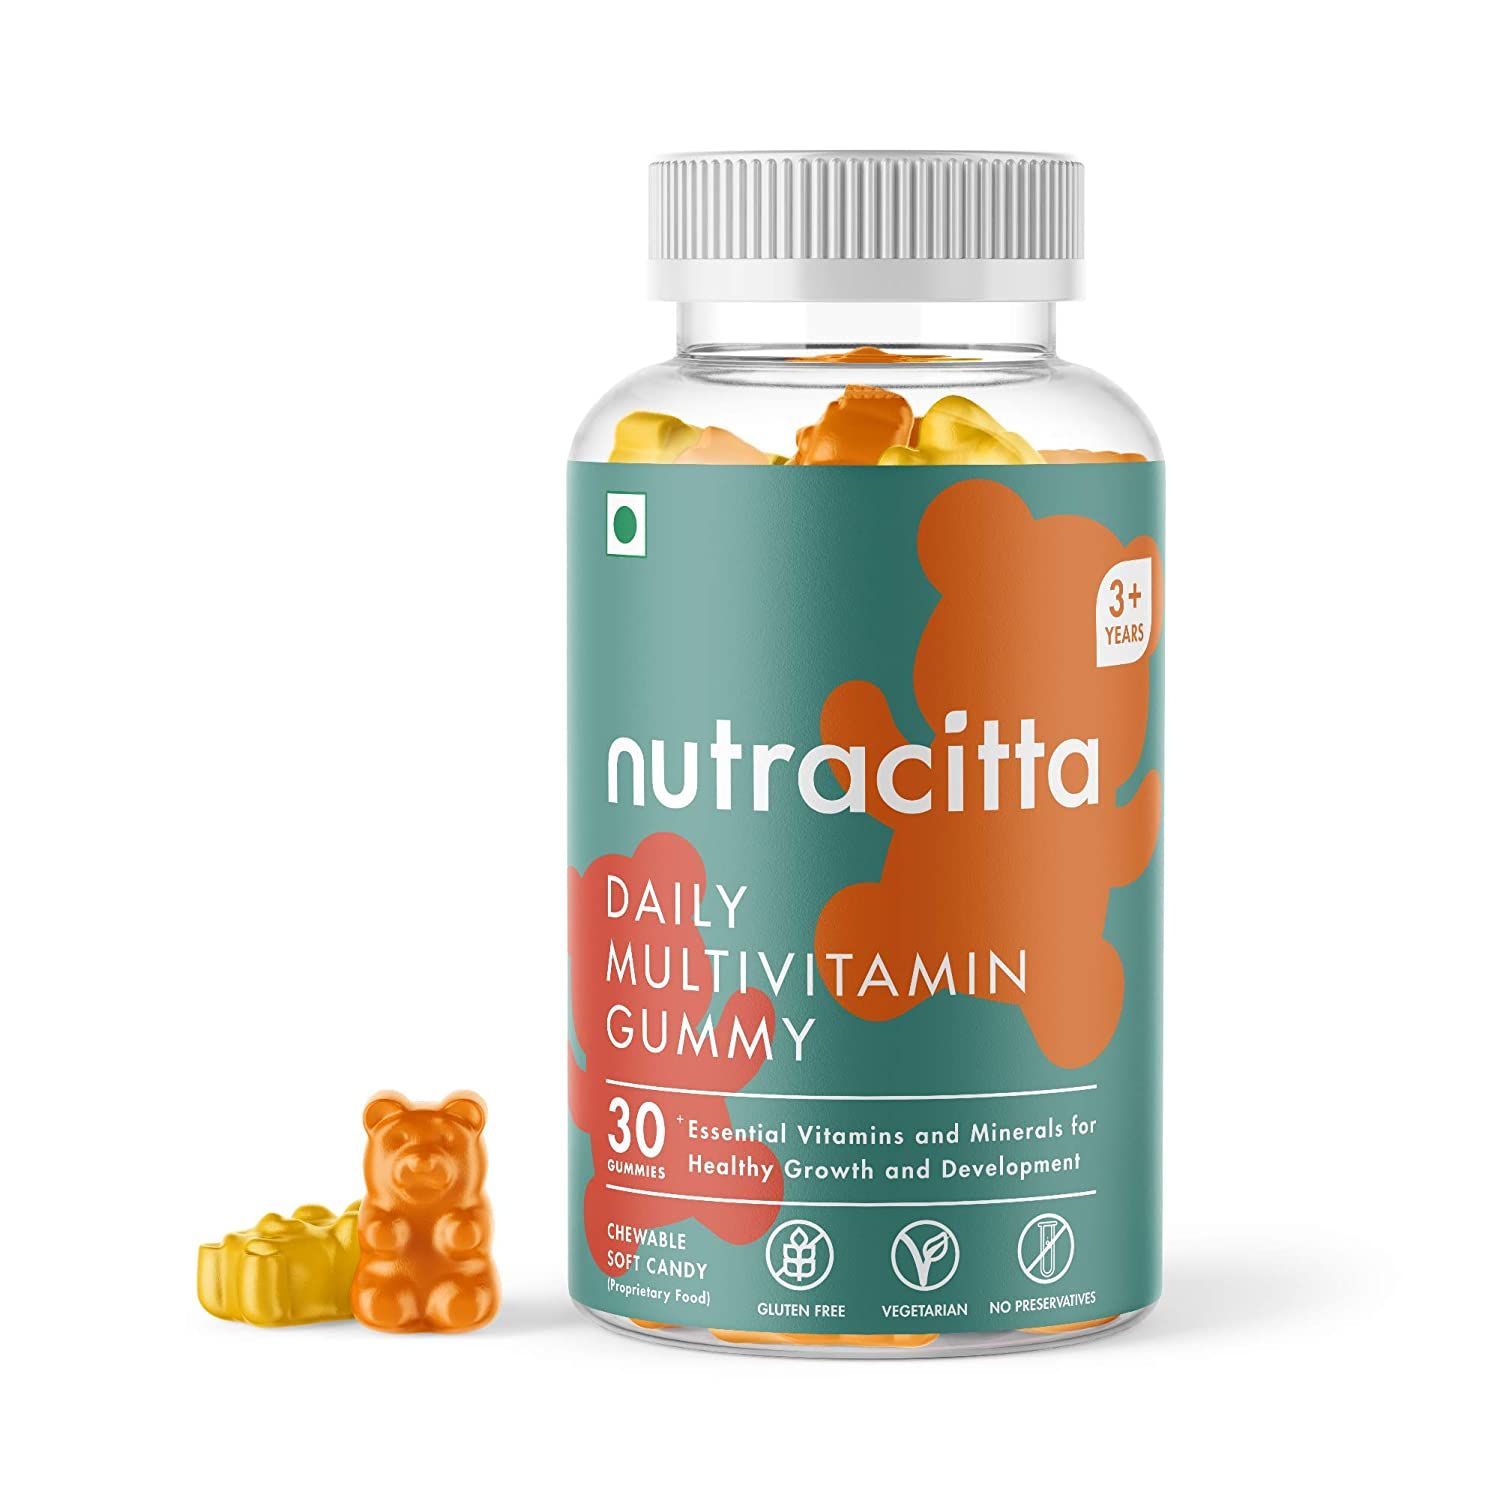 Nutracitta Daily Multivitamin For Kids & Adults Image